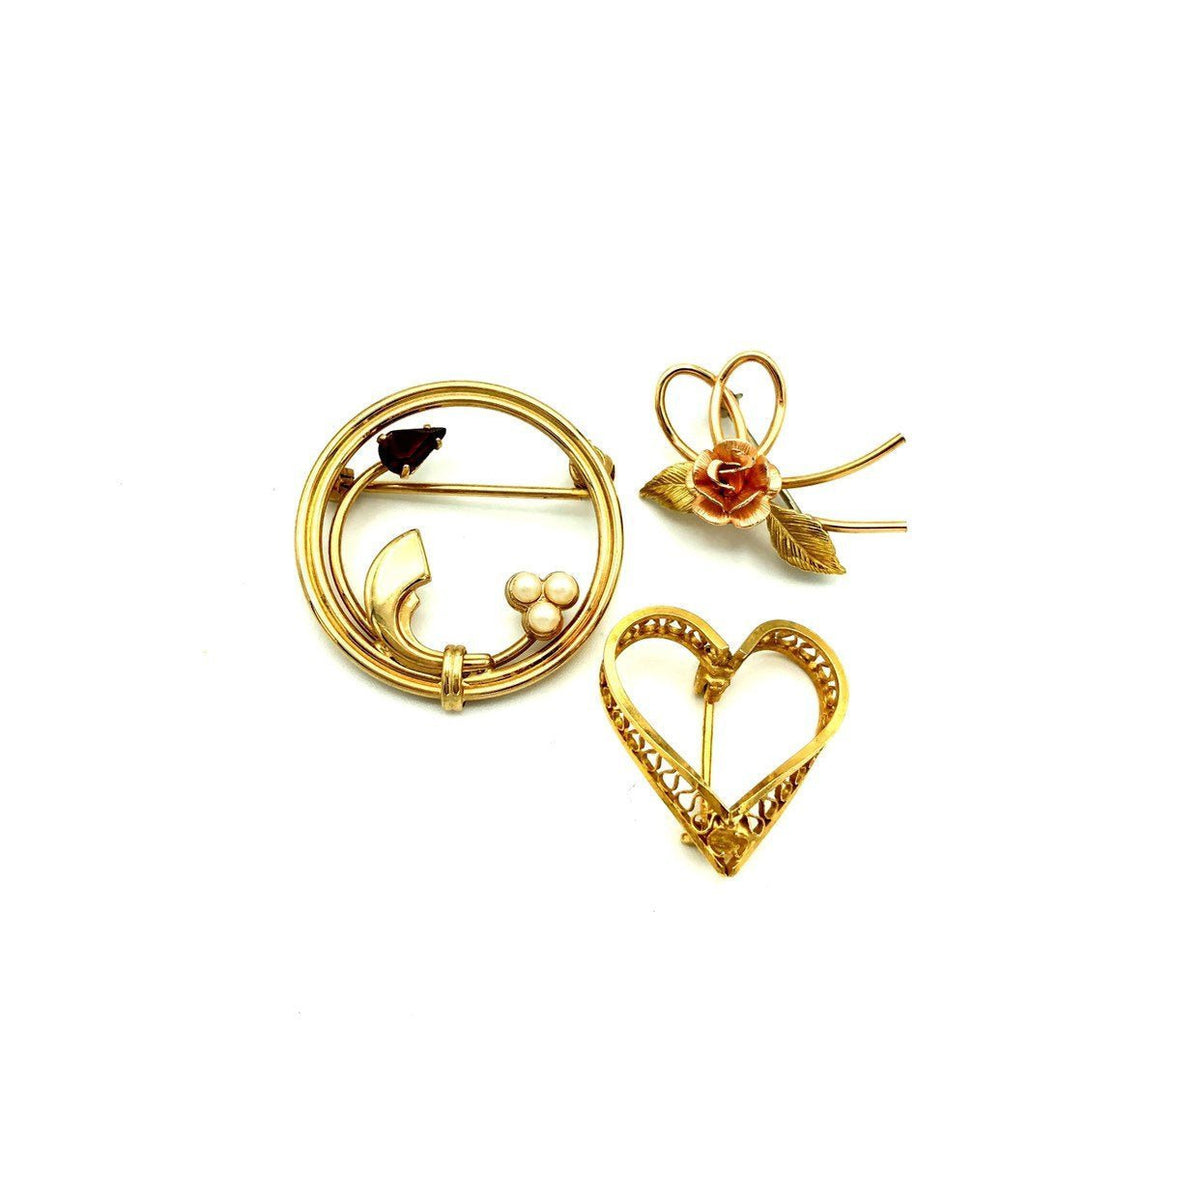 Gold Pearl Vintage Heart Brooch Scatter Pin Trio - 24 Wishes Vintage Jewelry